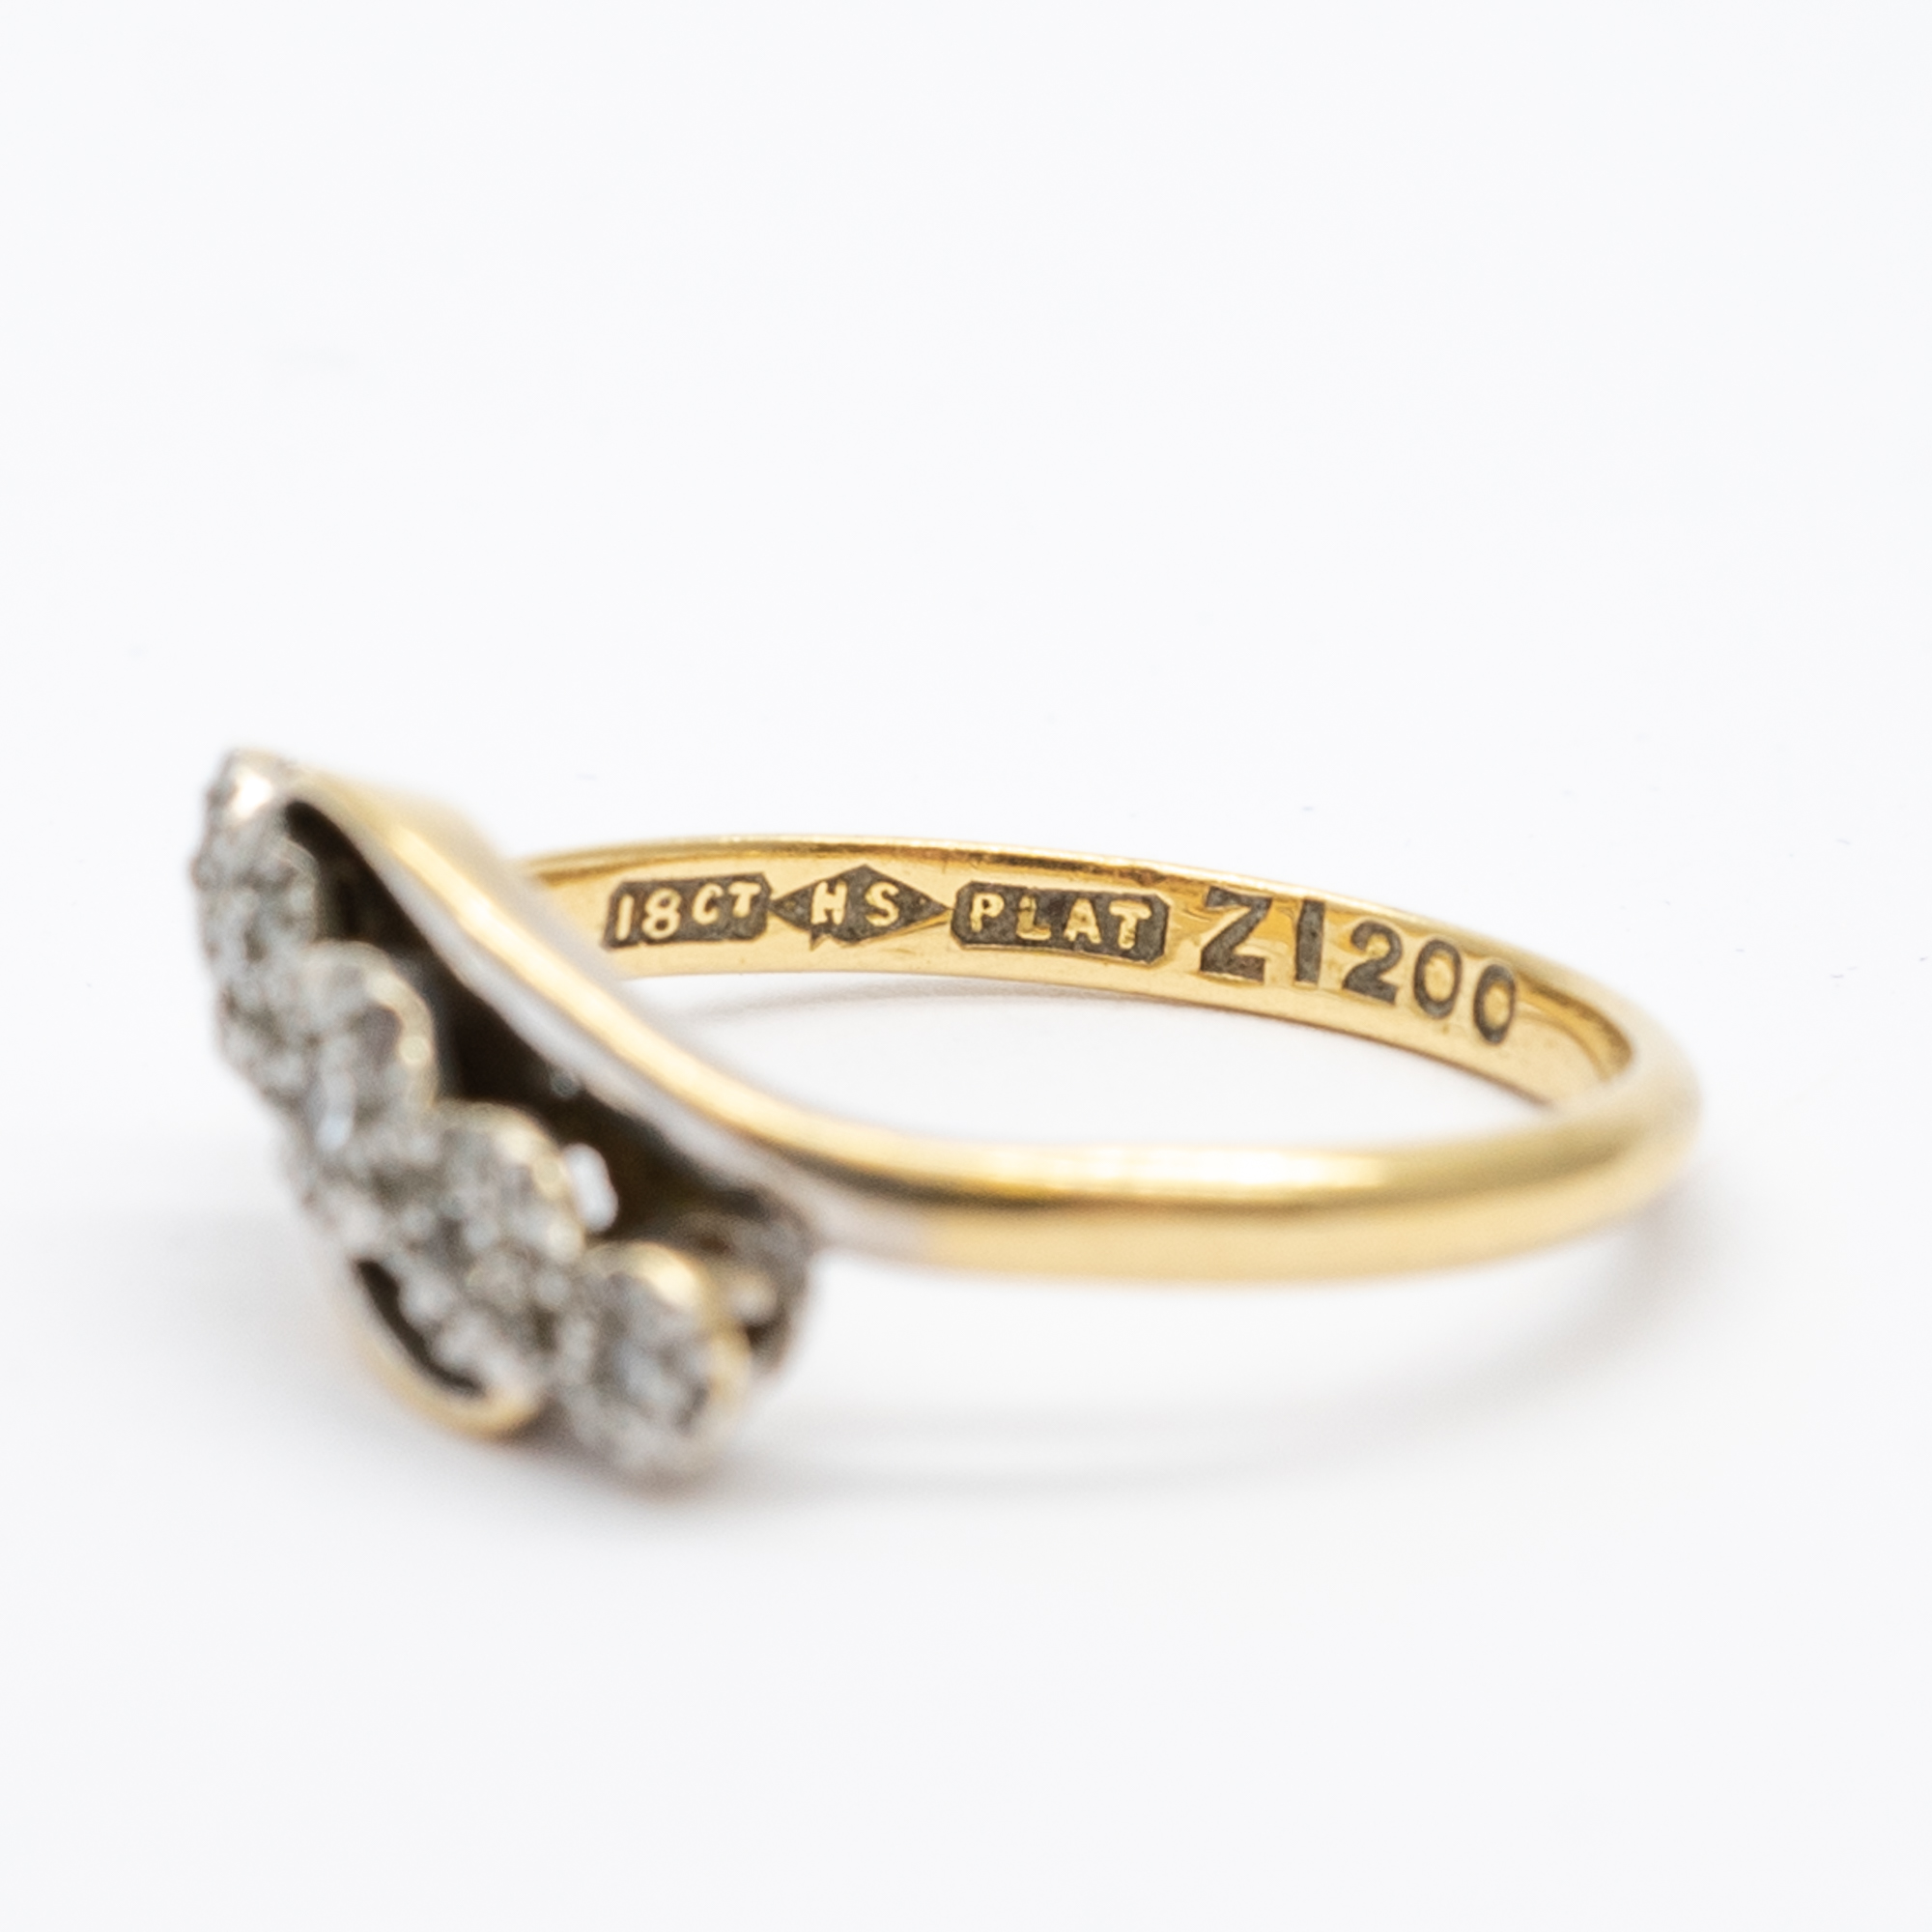 A vintage 18ct yellow gold and platinum 5 stone diamond twist ring - Image 2 of 4